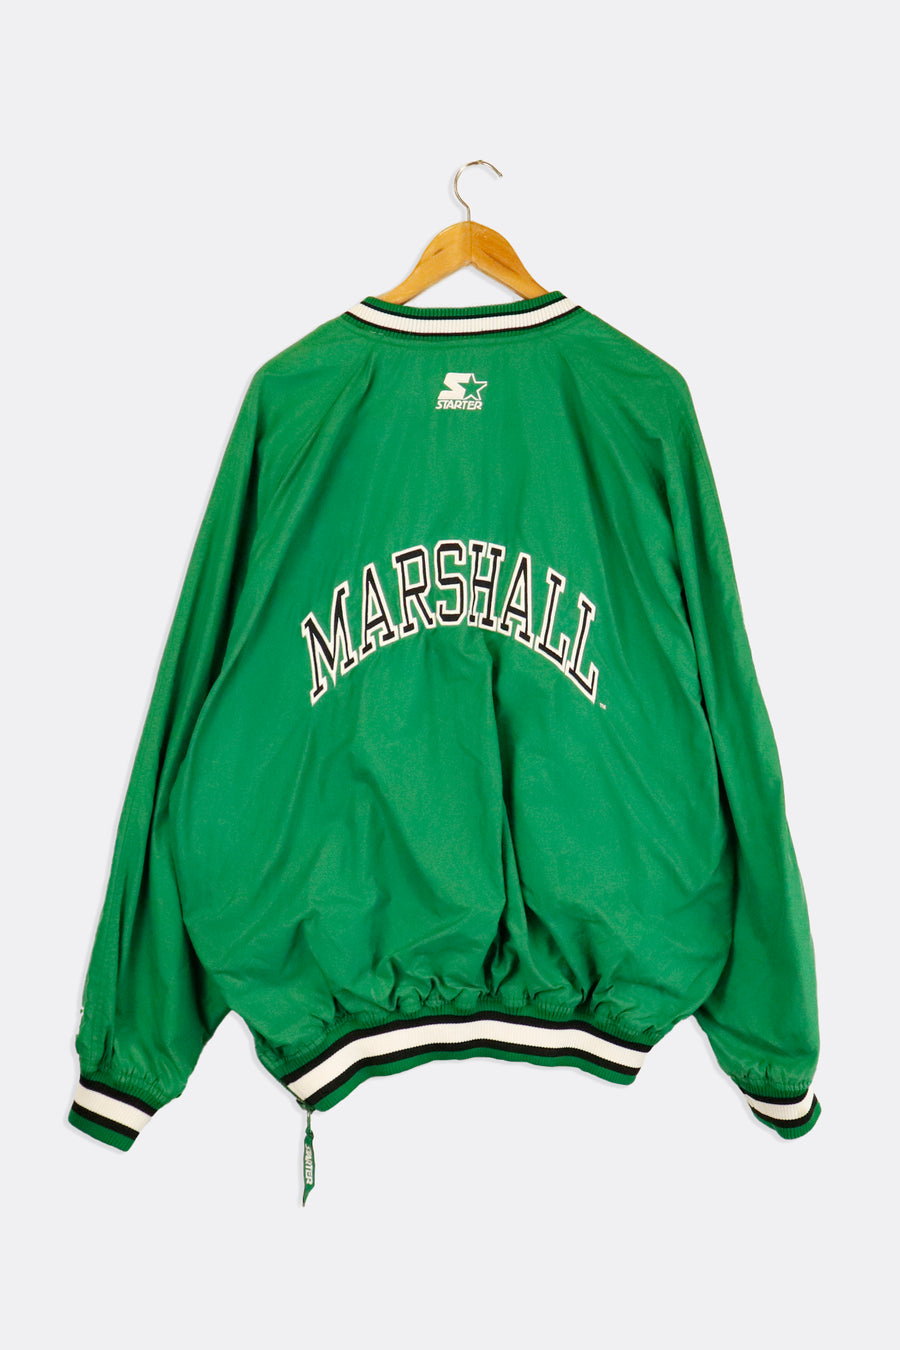 Vintage Started NCAA Marshall Pullover Jacket Embroided Logo And Lettering Outerwear Sz XL